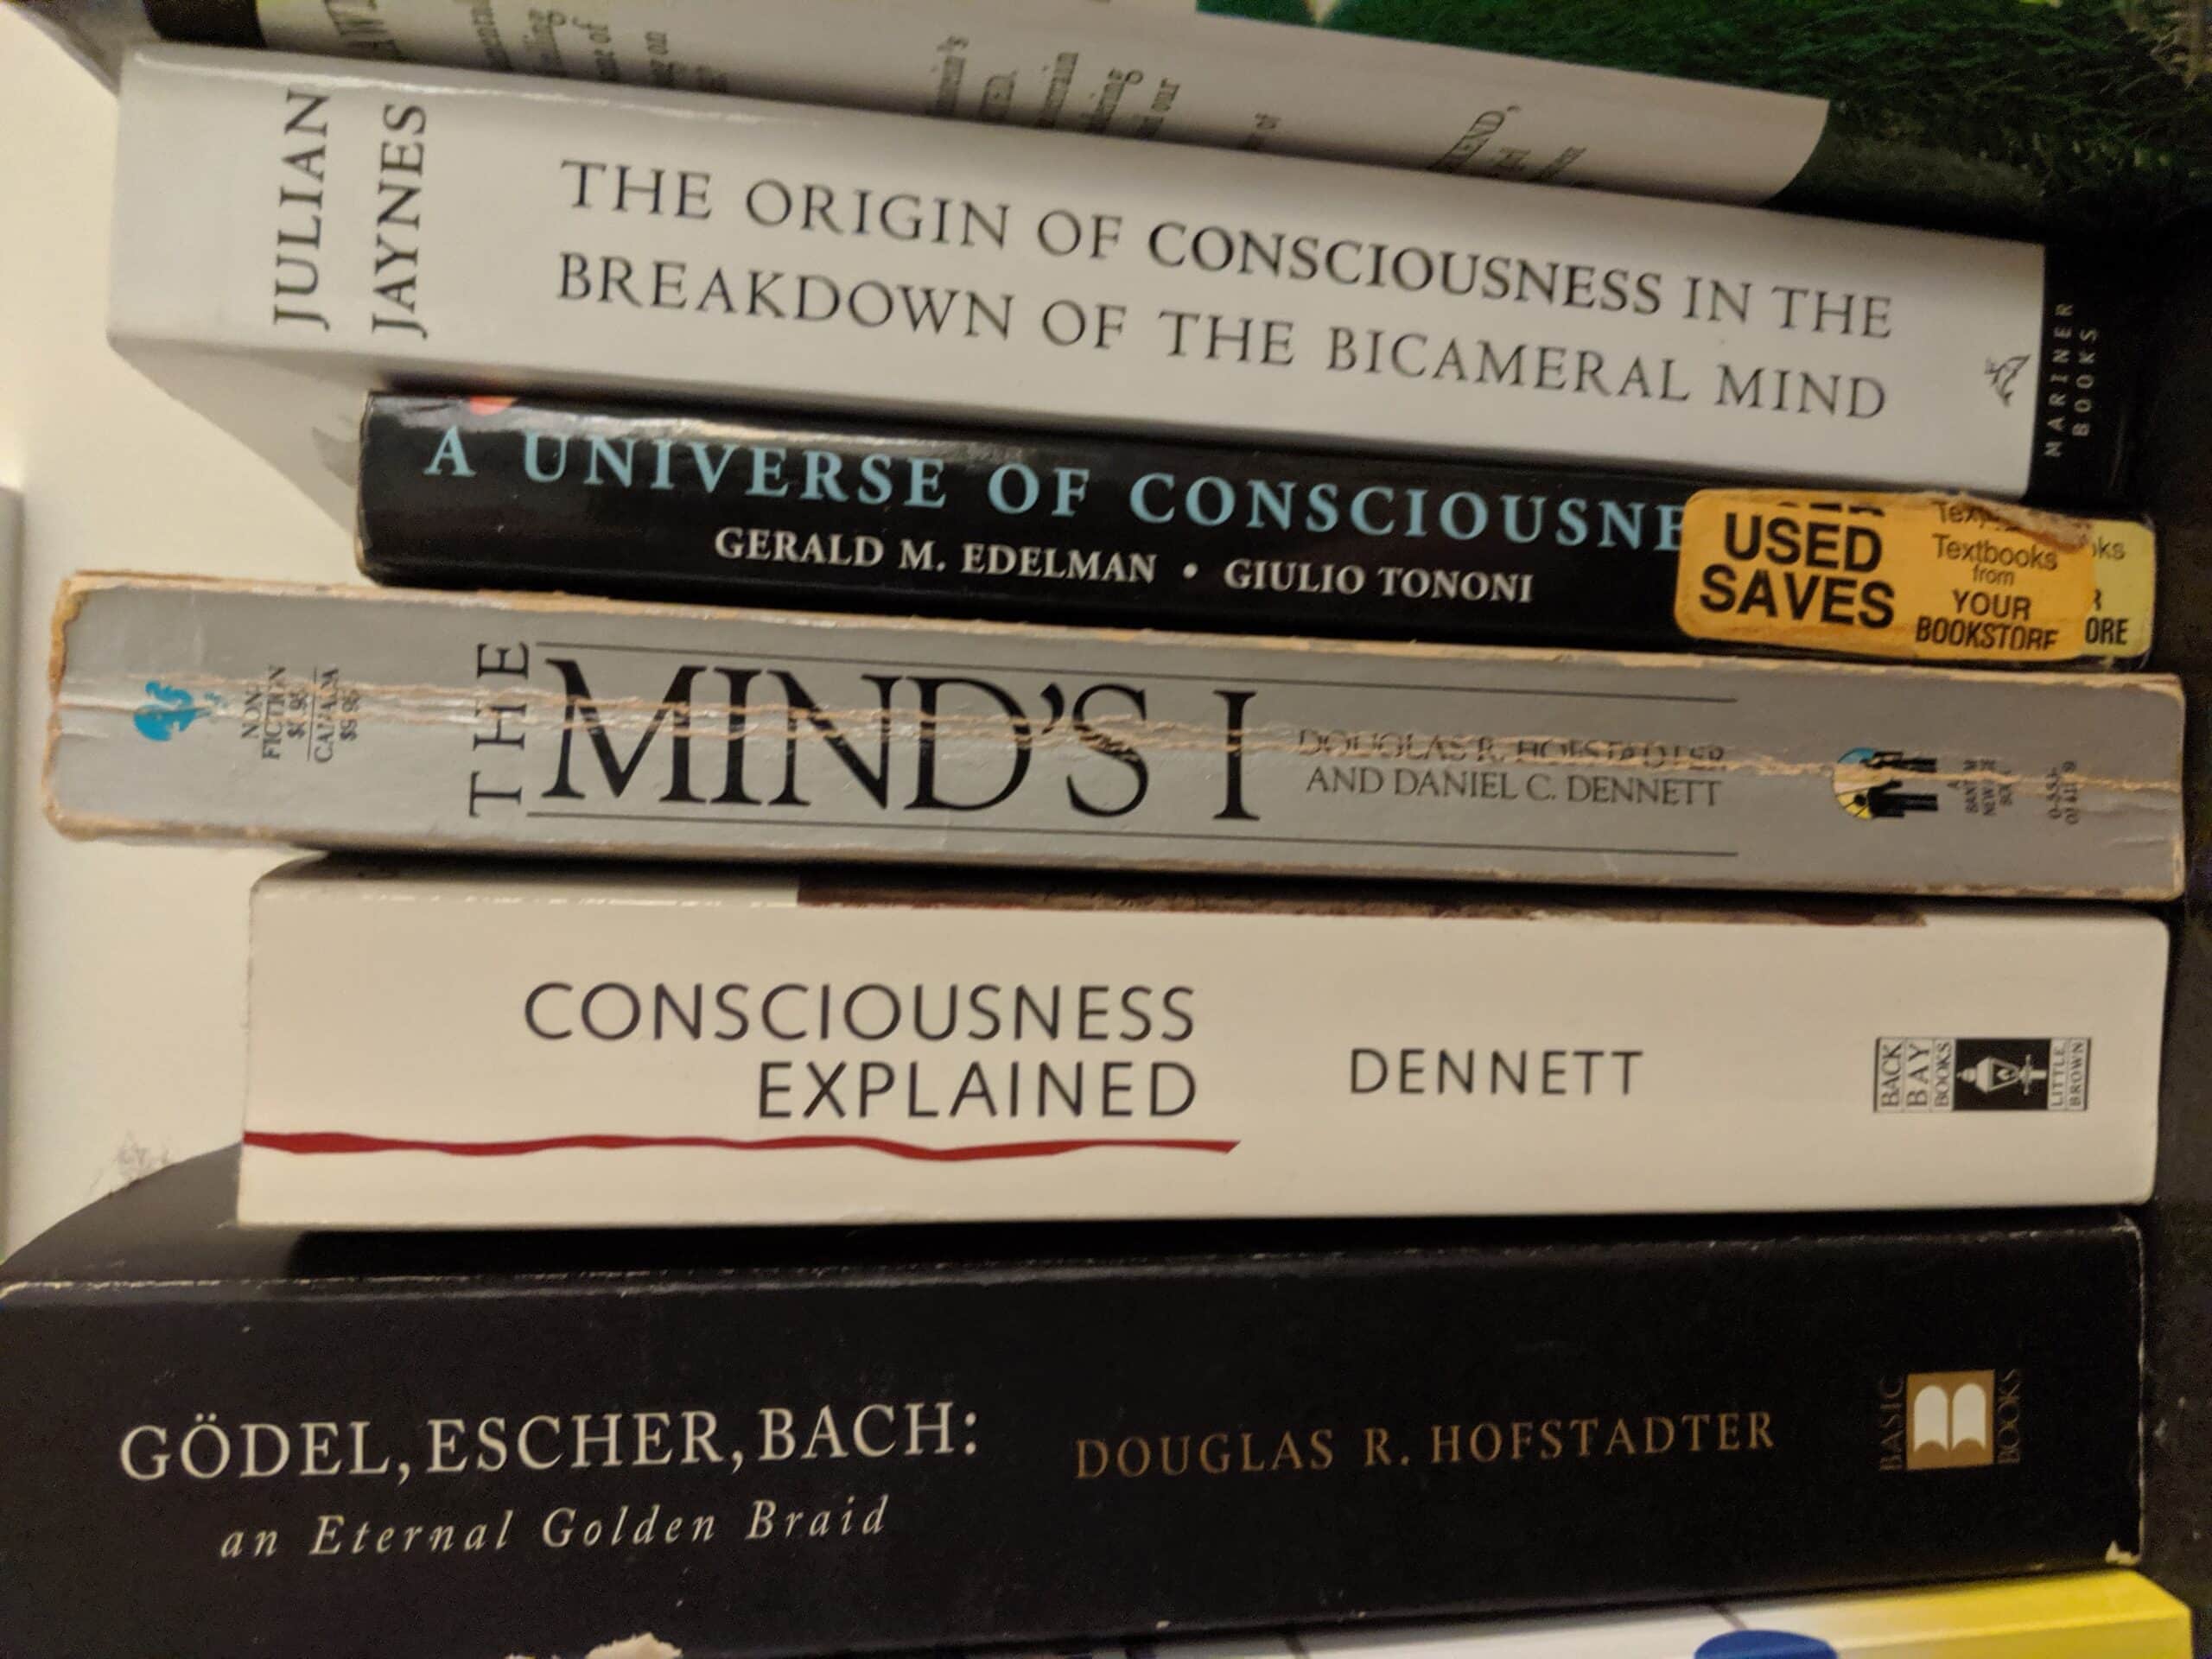 Here are books on consciousness found in our observable universe. These same books will also appear in a purely computational version of our universe – written by computational authors – who apparently are just as baffled by their conscious experiences as we are.